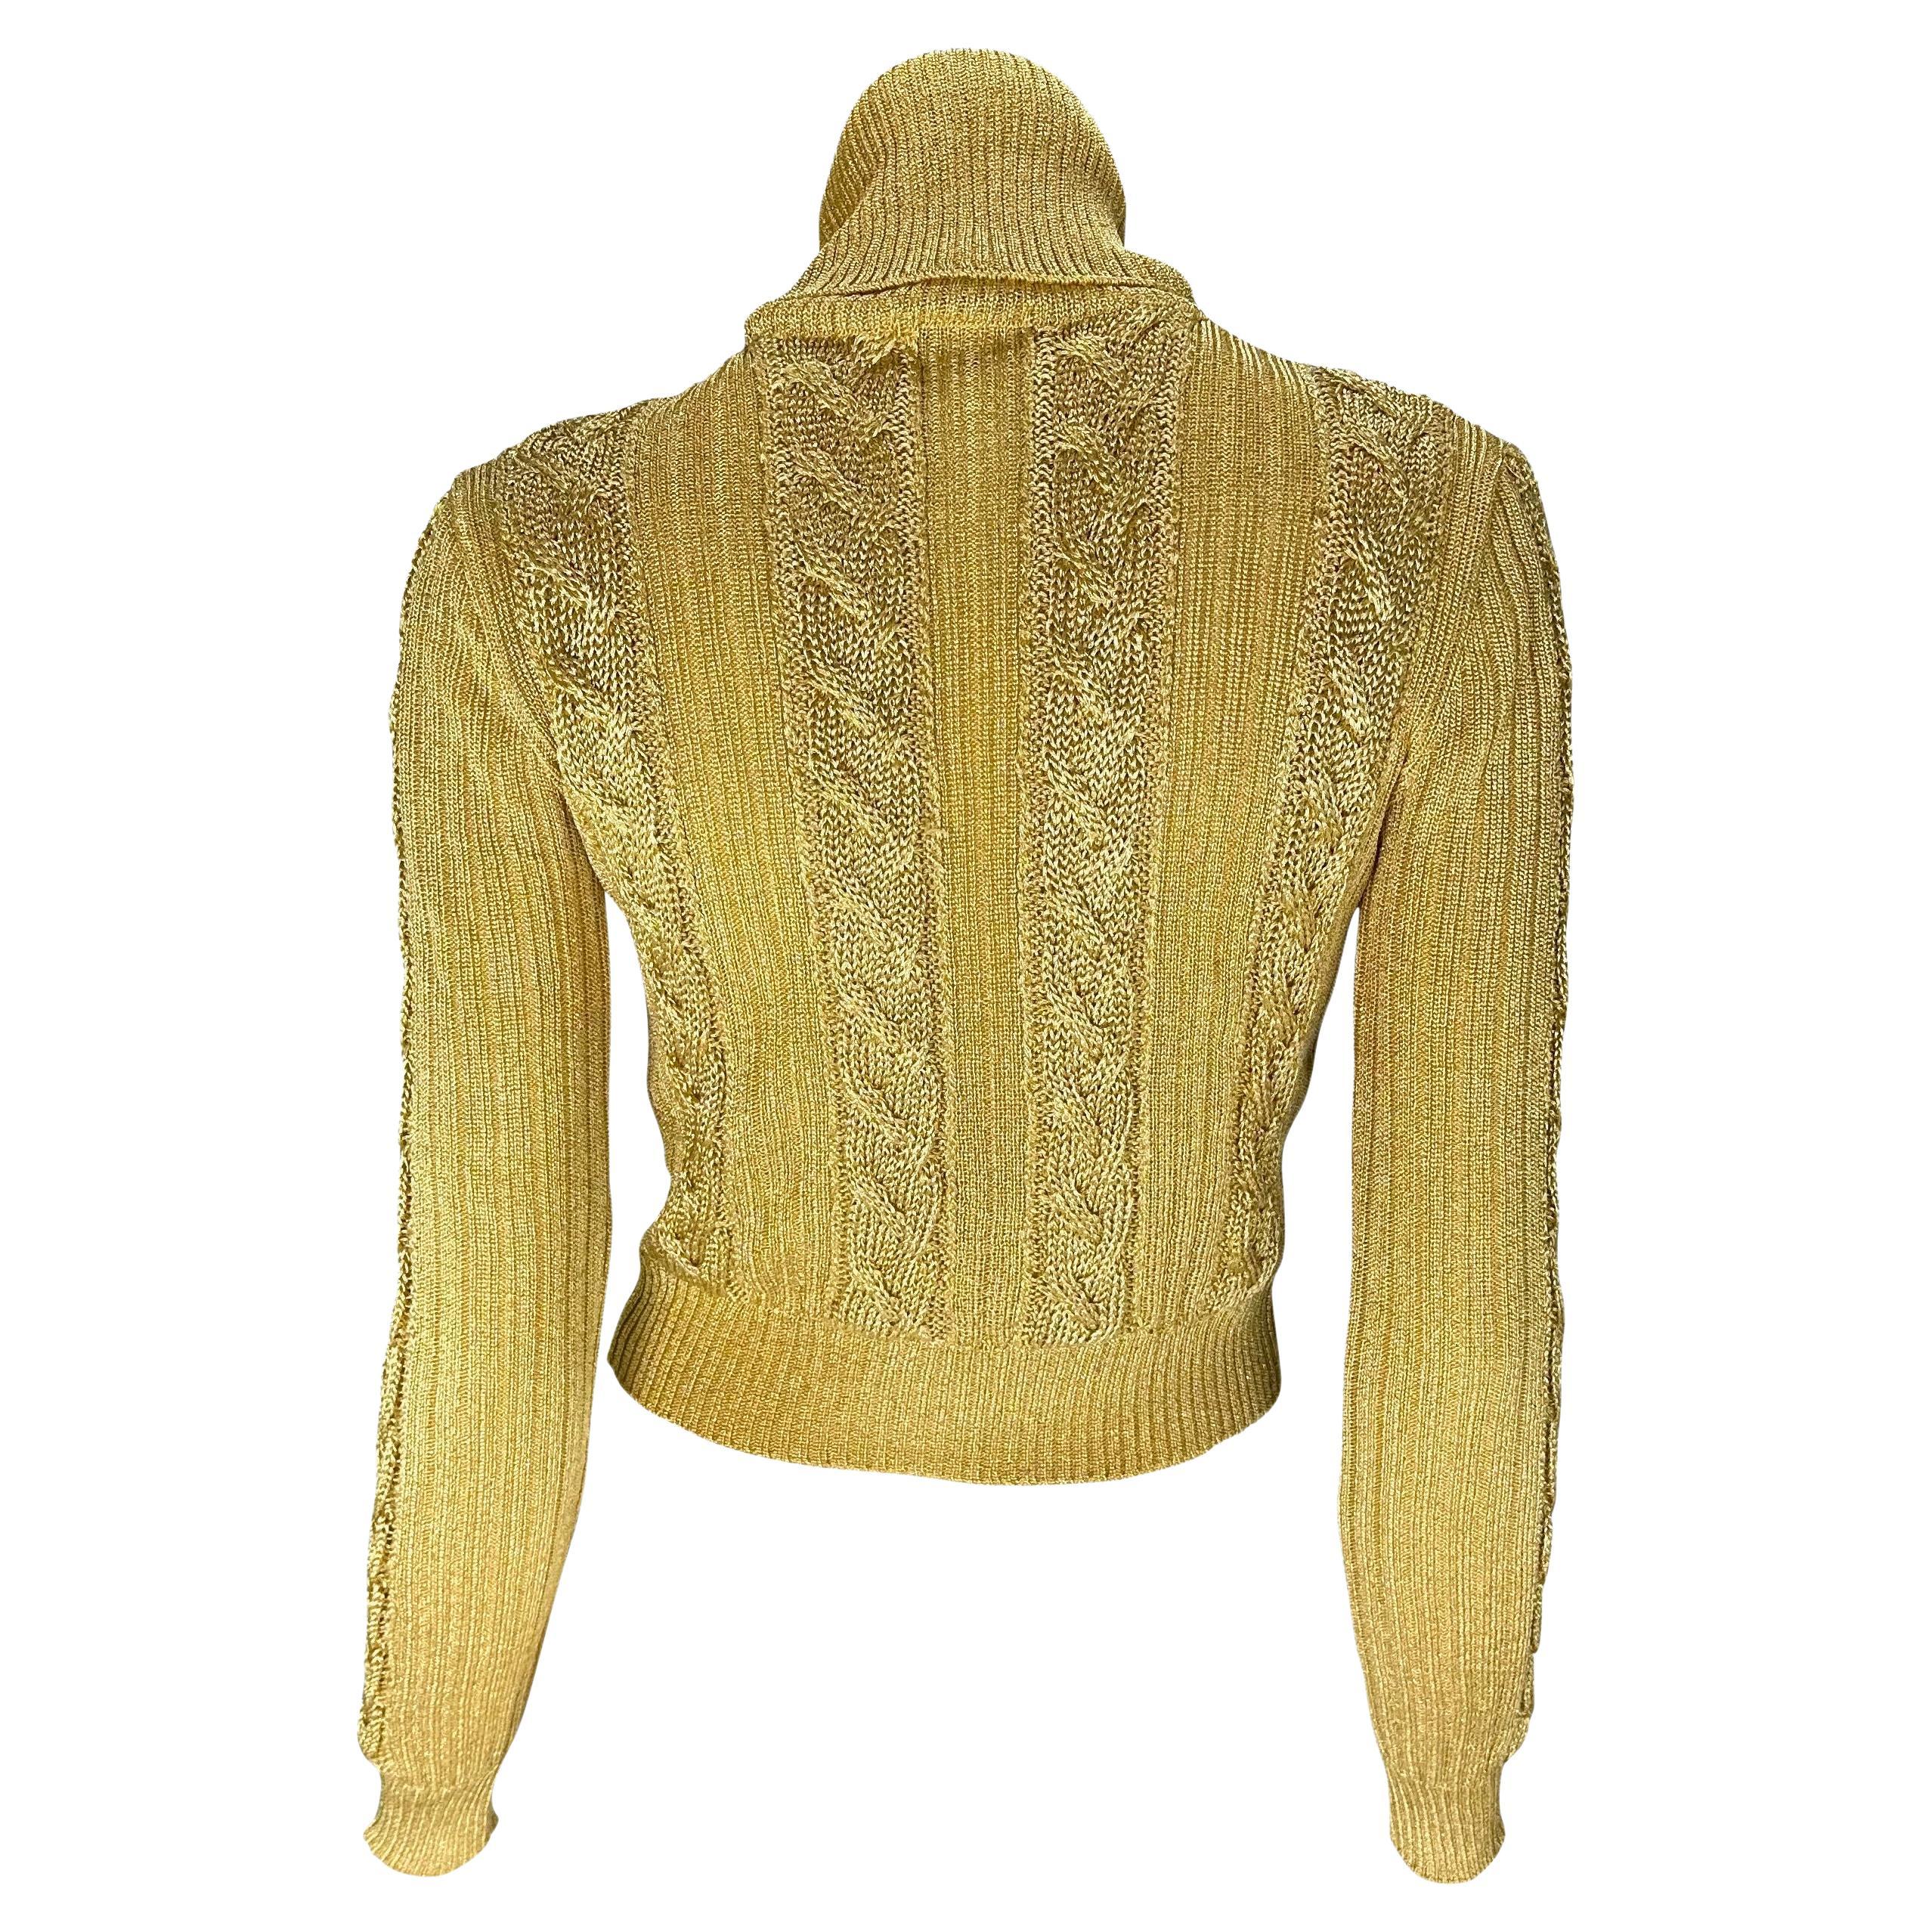 Women's F/W 1994 Gianni Versace Ad Runway Gold Metallic Cable Knit Turtleneck Sweater